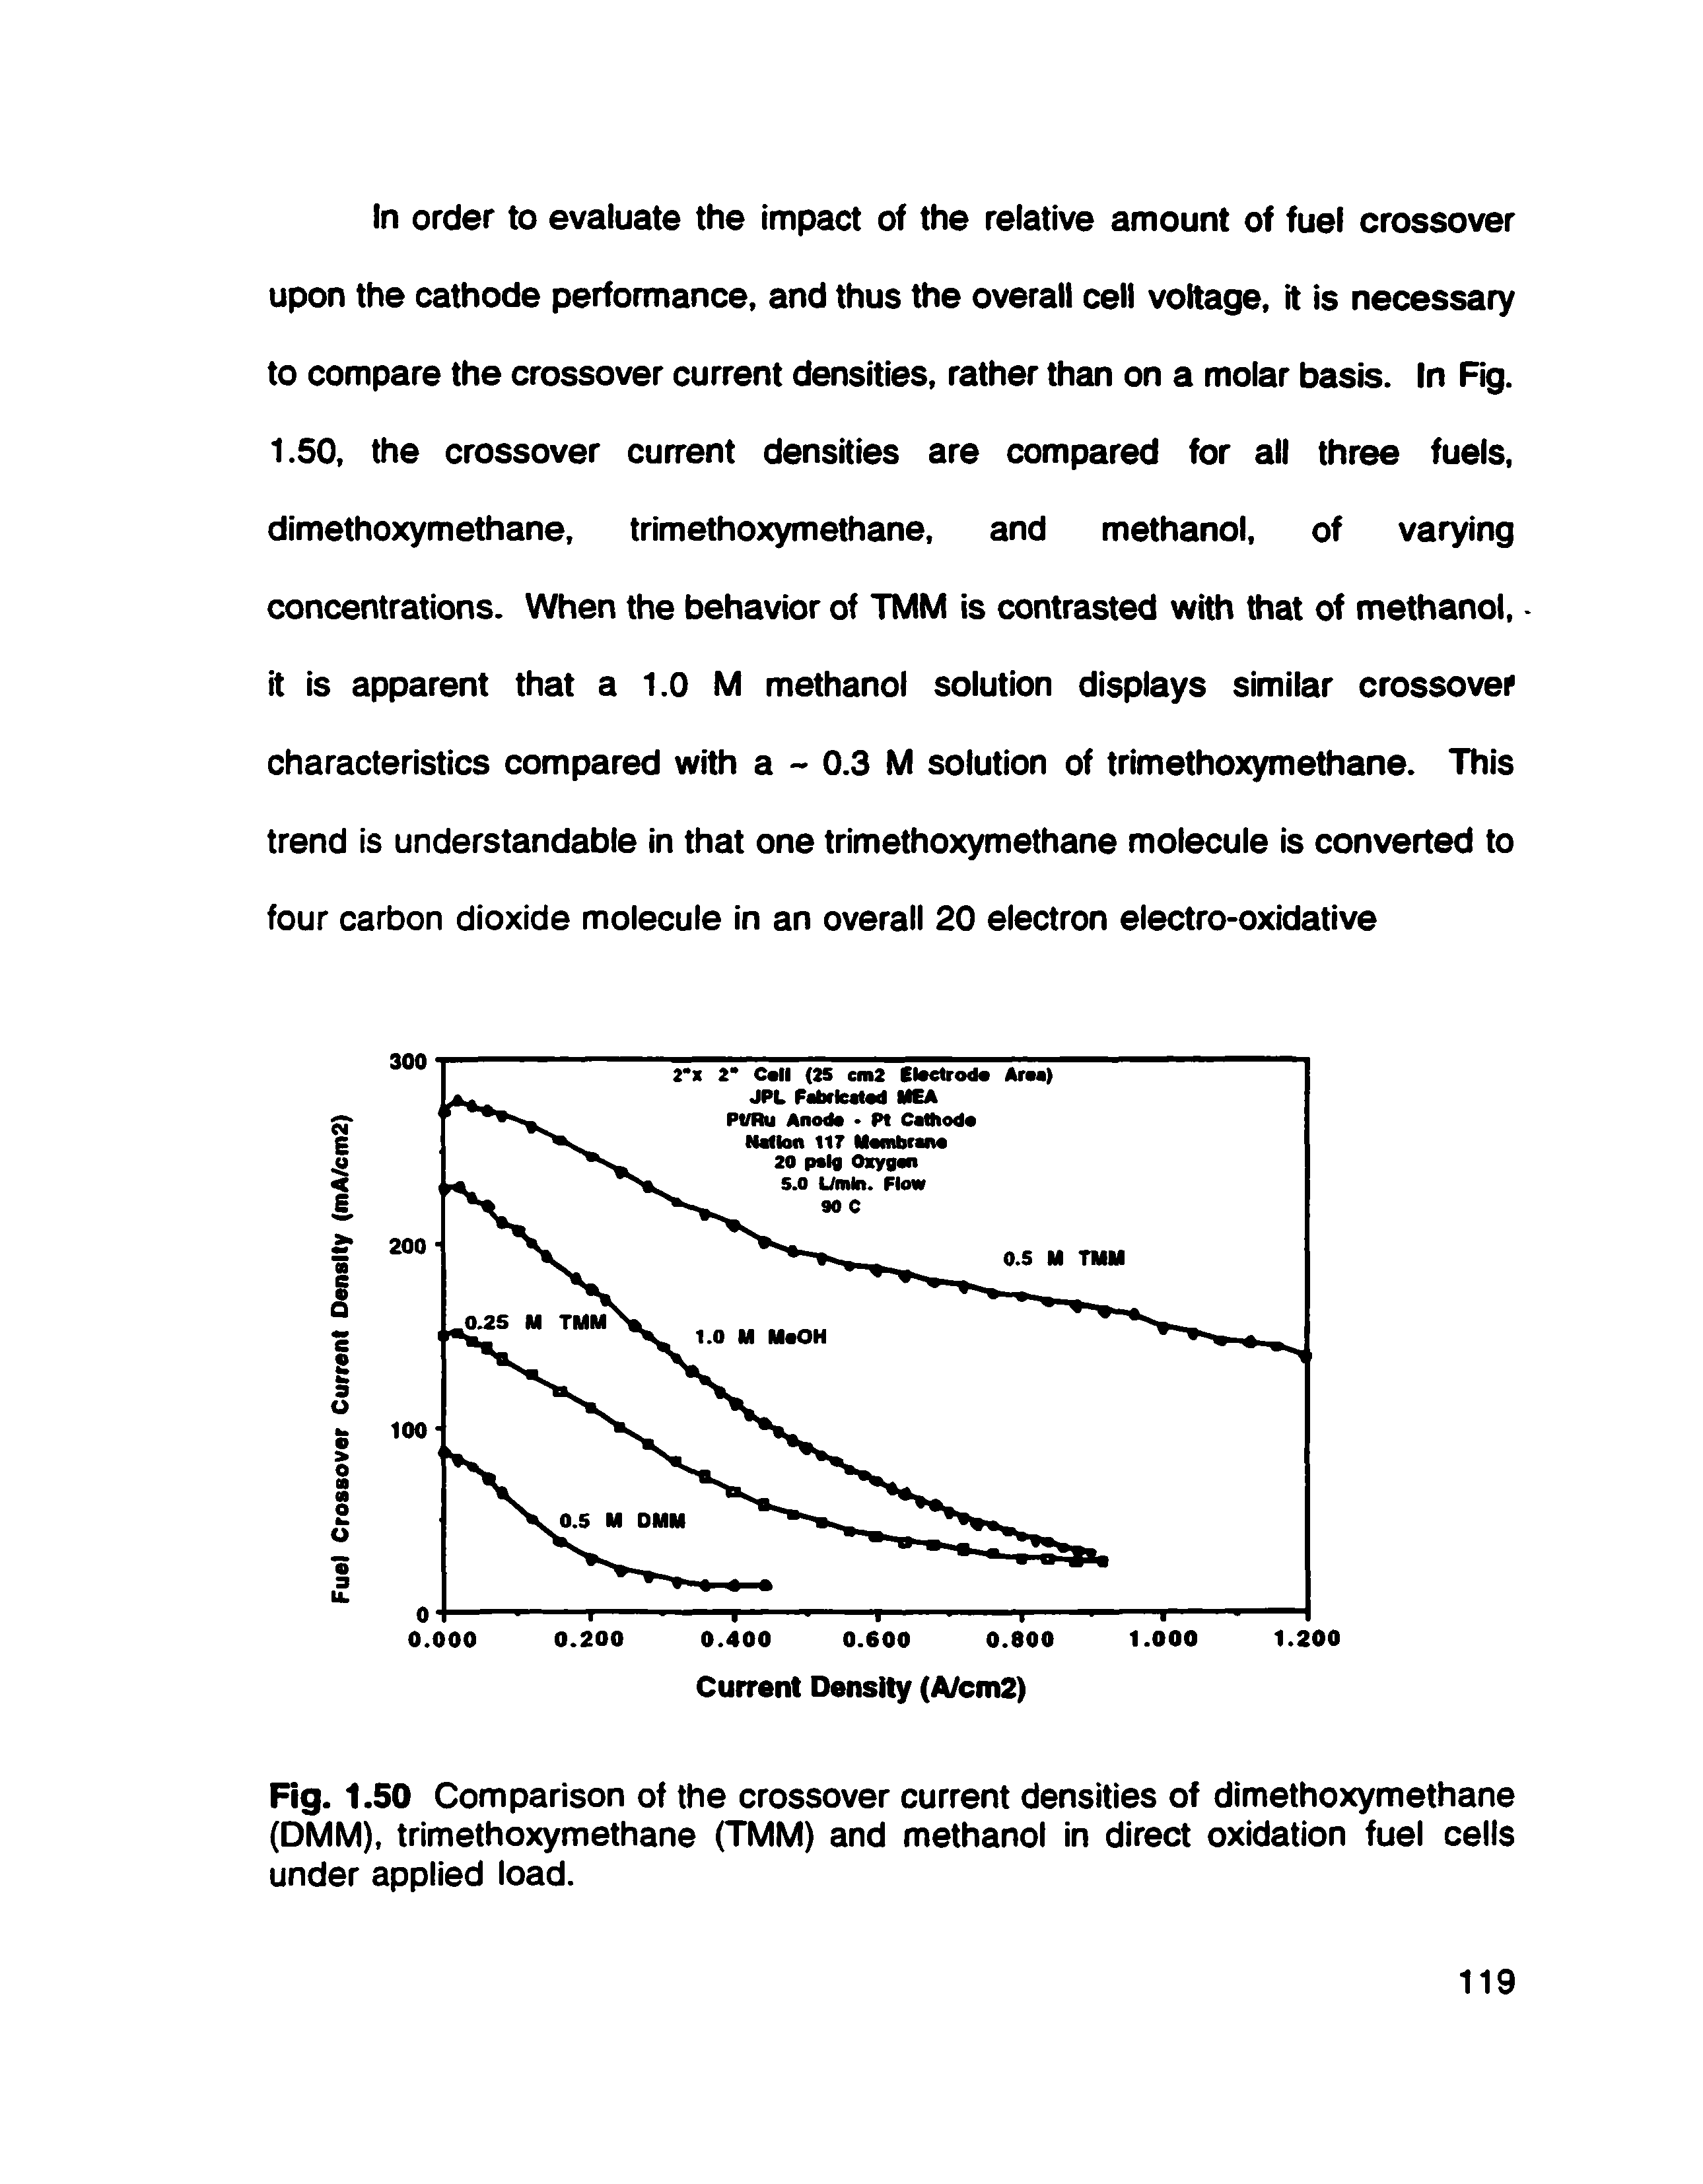 Fig. 1.50 Comparison of the crossover current densities of dimethoxymethane (DMM), trimethoxymethane (TMM) and methanol in direct oxidation fuel cells under applied load.